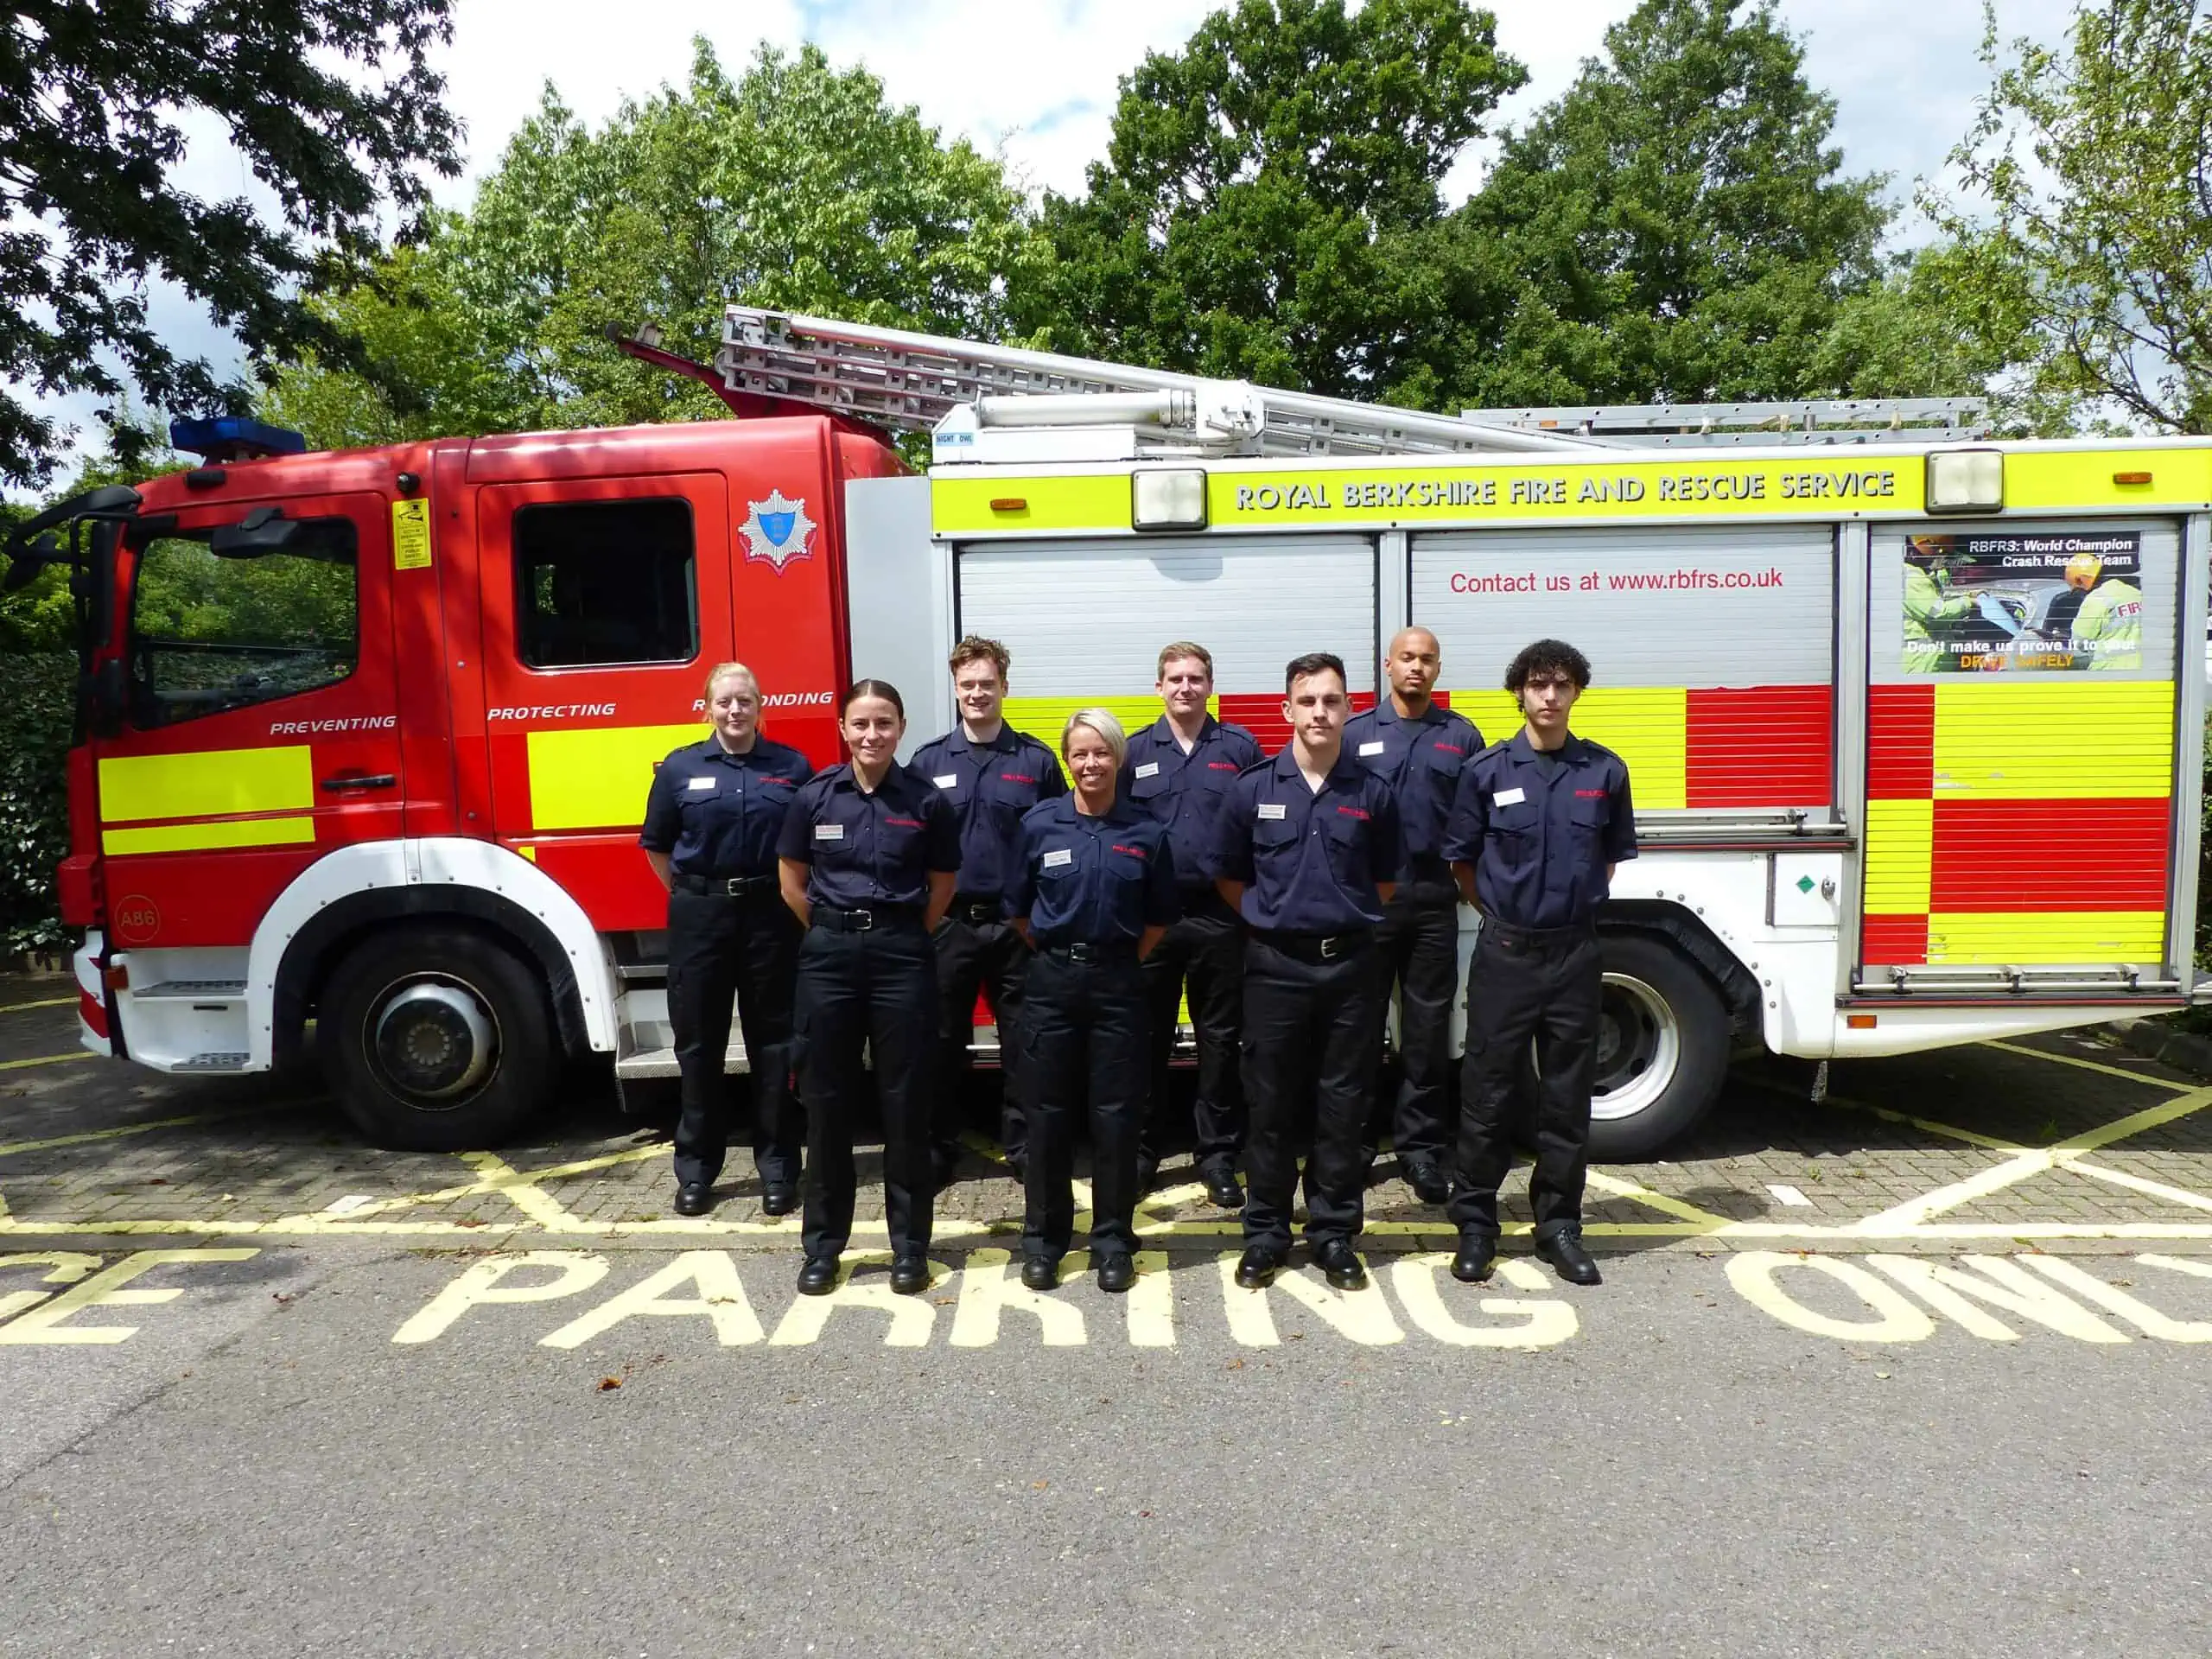 A group of Firefighter Apprentices stood in front of Fire Engine.